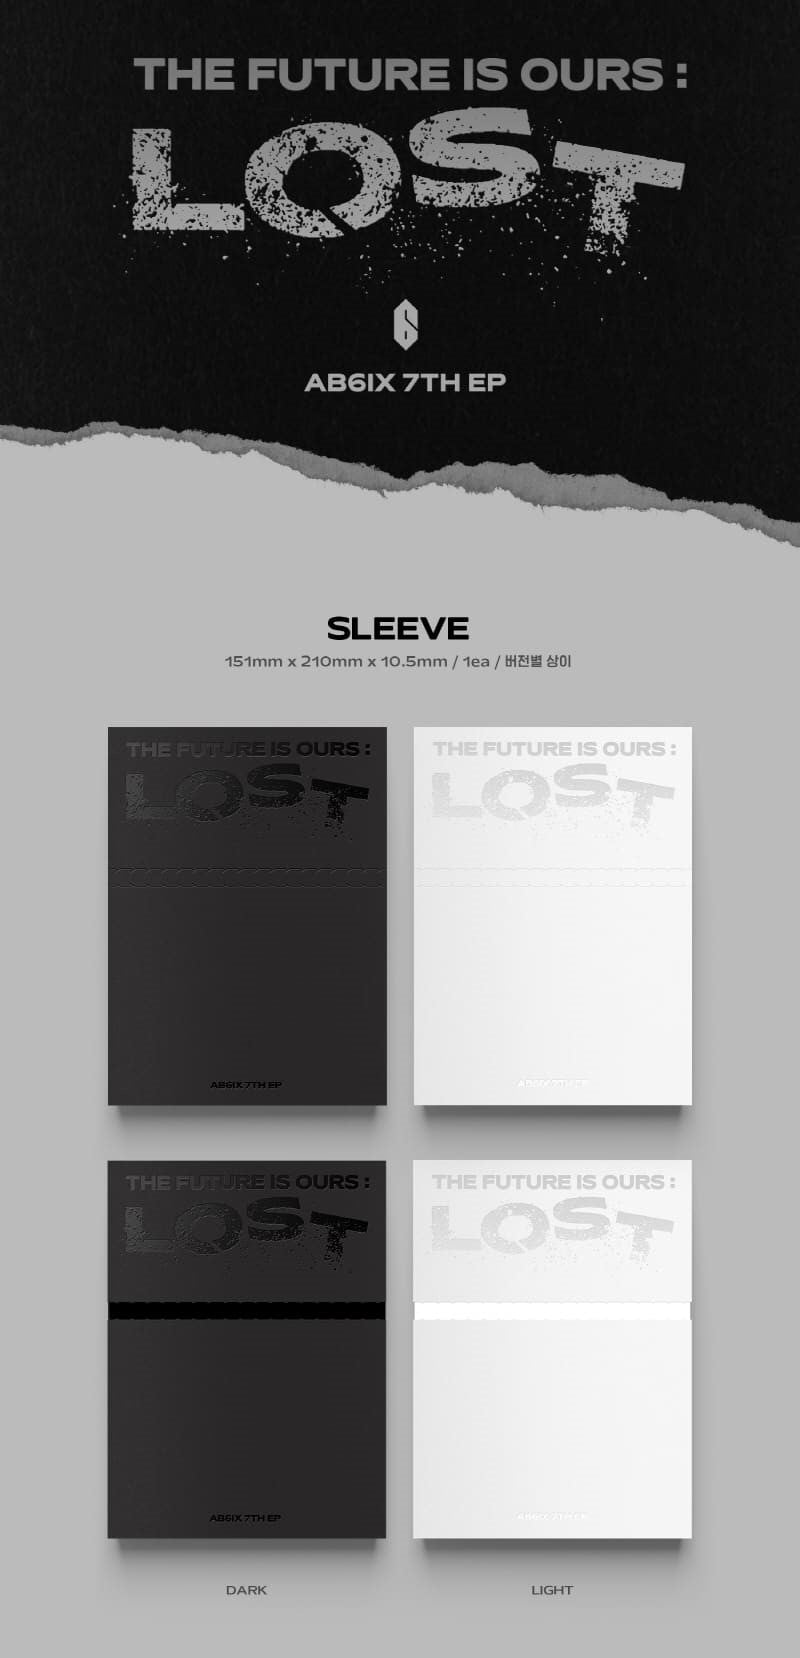 AB6IX EP Vol. 7 - THE FUTURE IS OURS : LOST (Random)